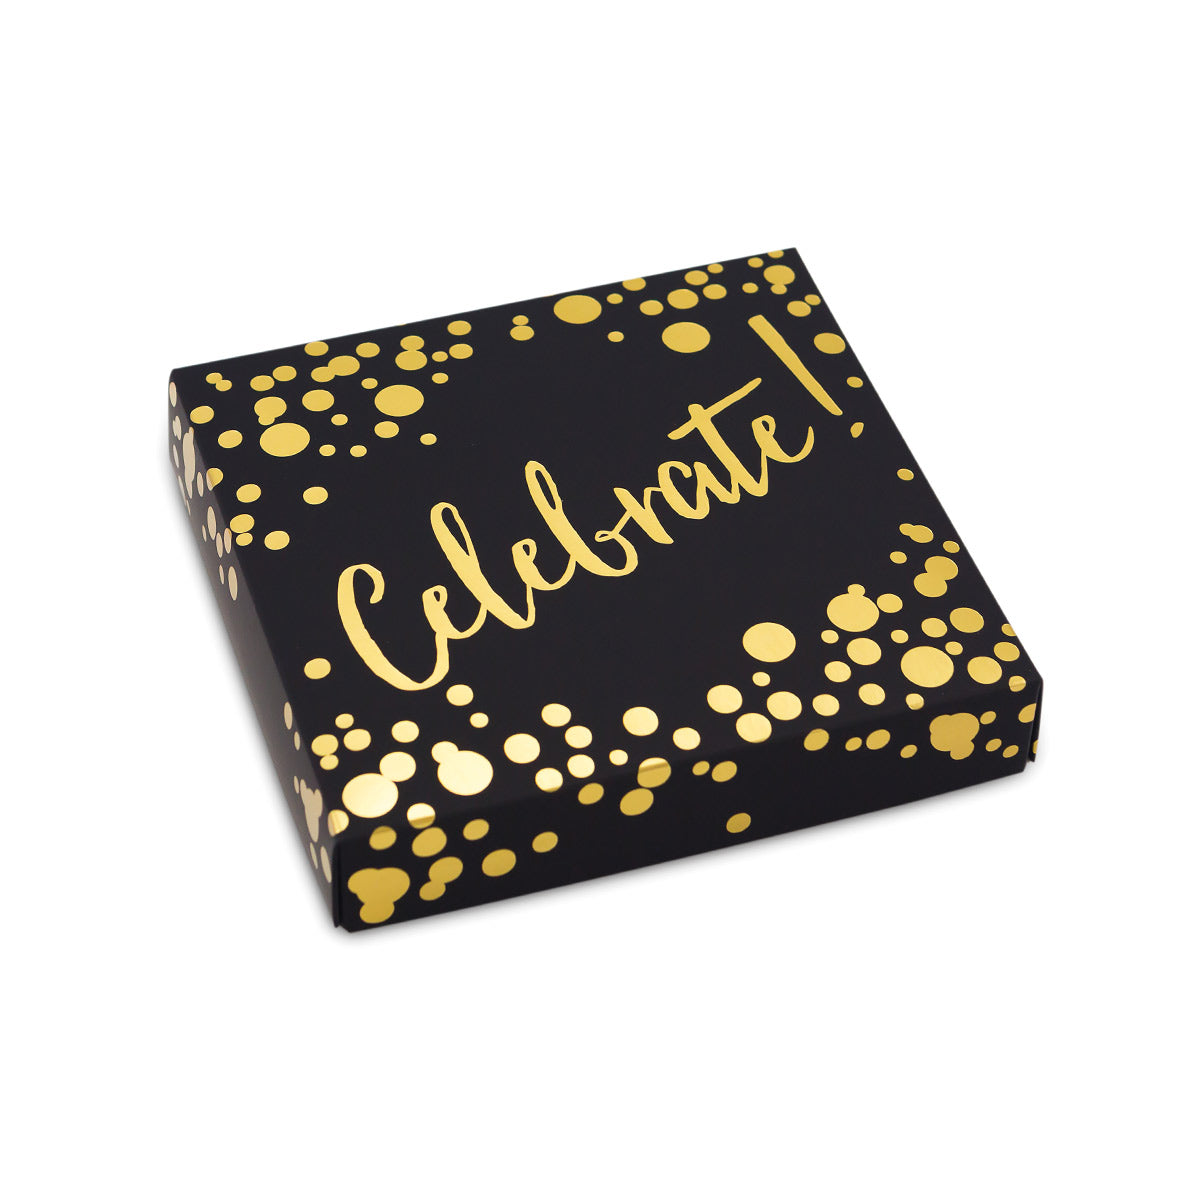 Celebrate Themed Box Cover for 16 Piece Holiday Assortment